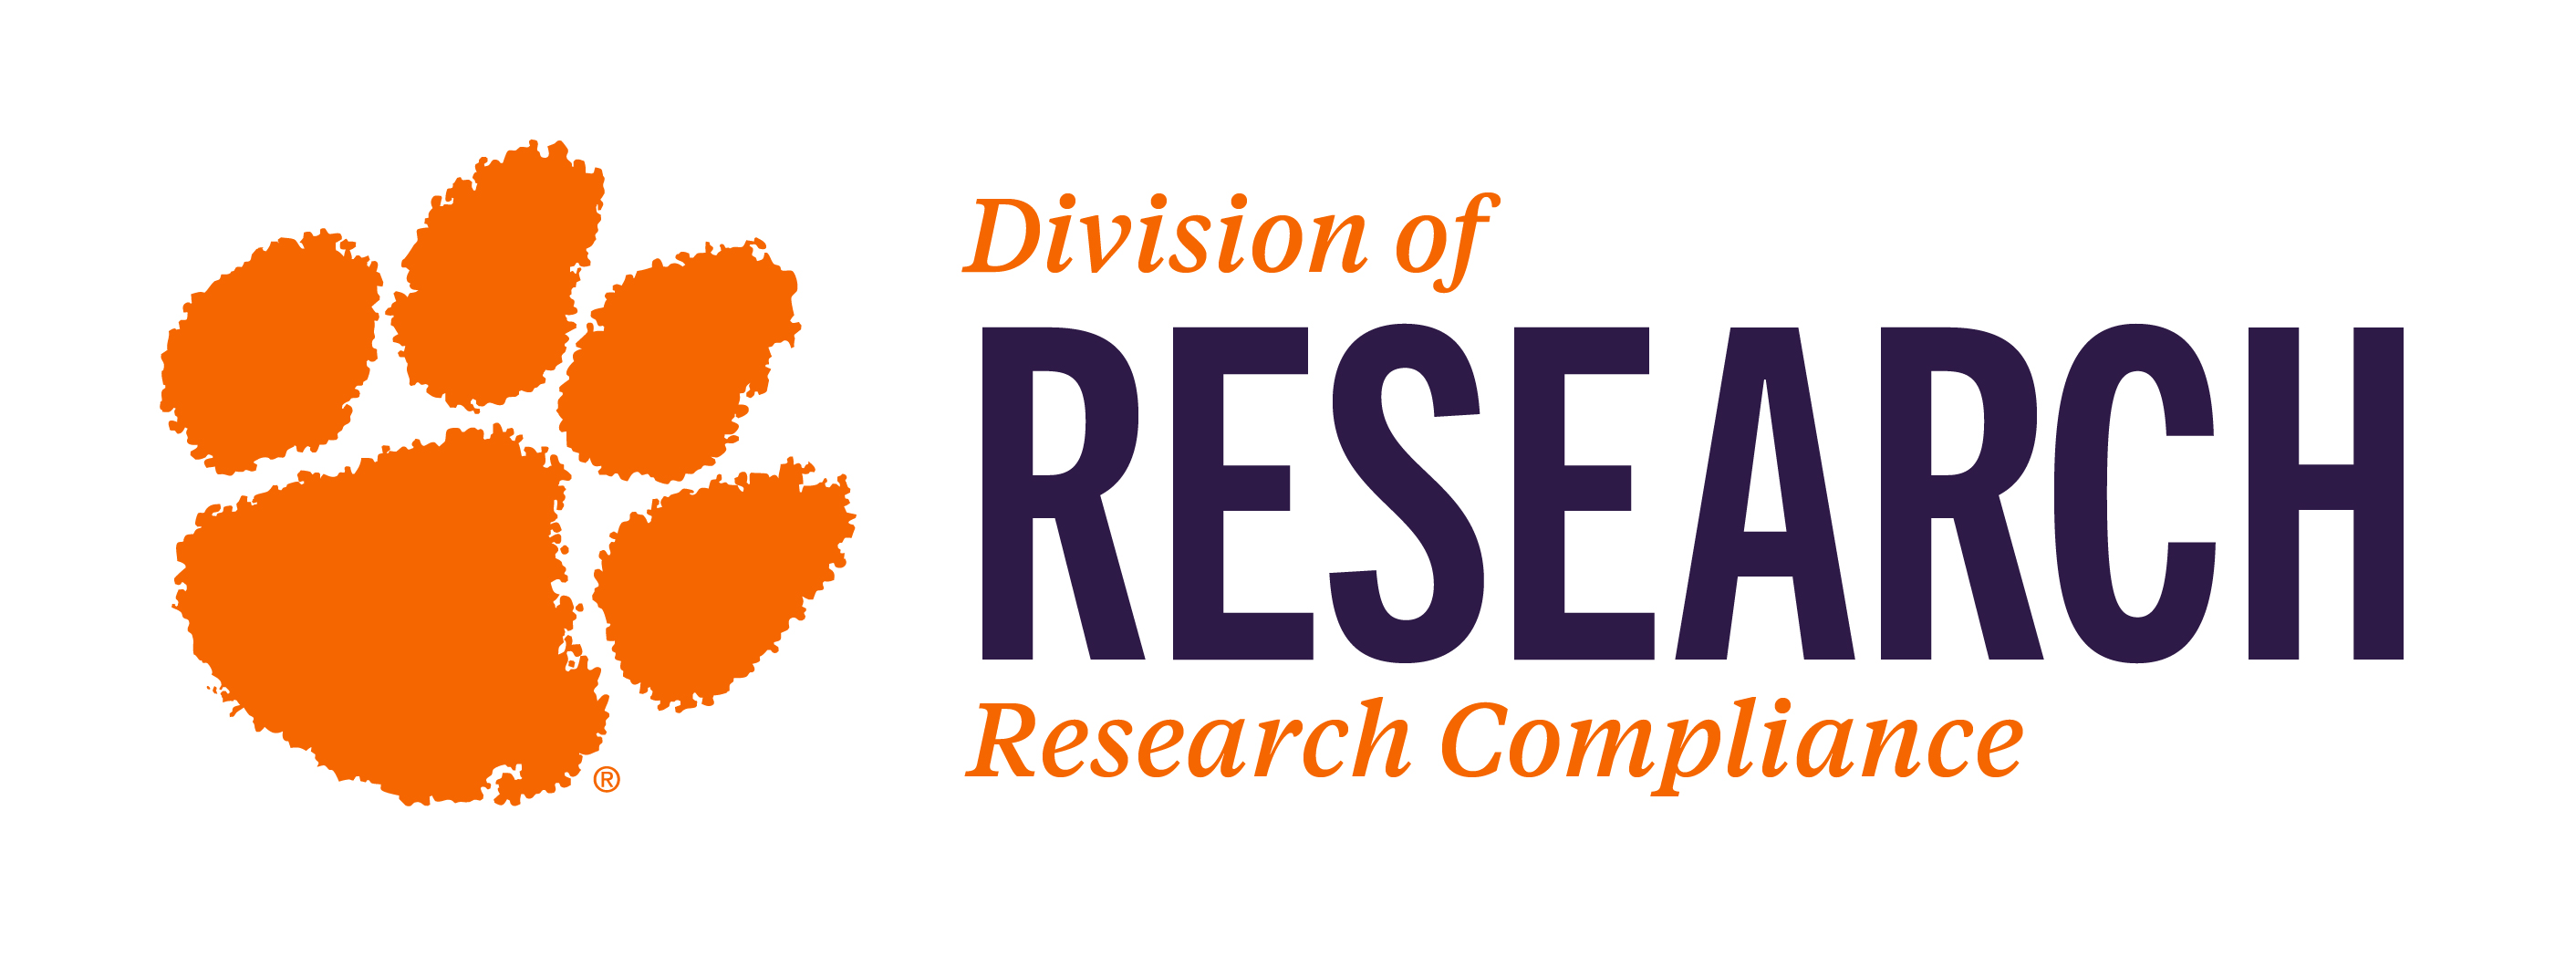 Office of Research Compliance Logo